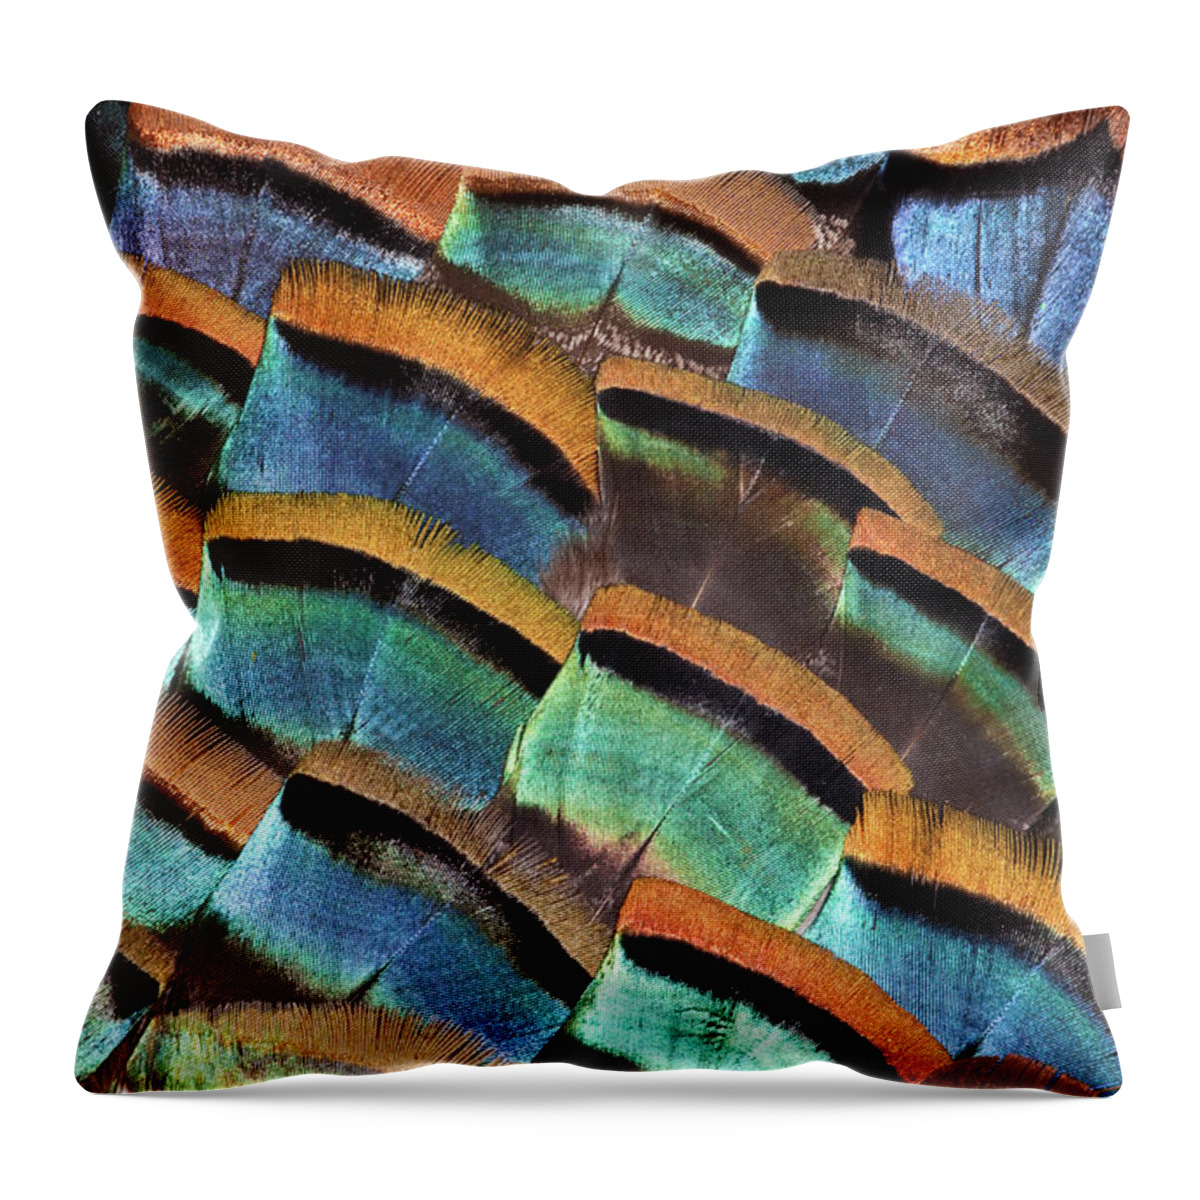 In A Row Throw Pillow featuring the photograph Large Feather Design Of Oscellated by Darrell Gulin